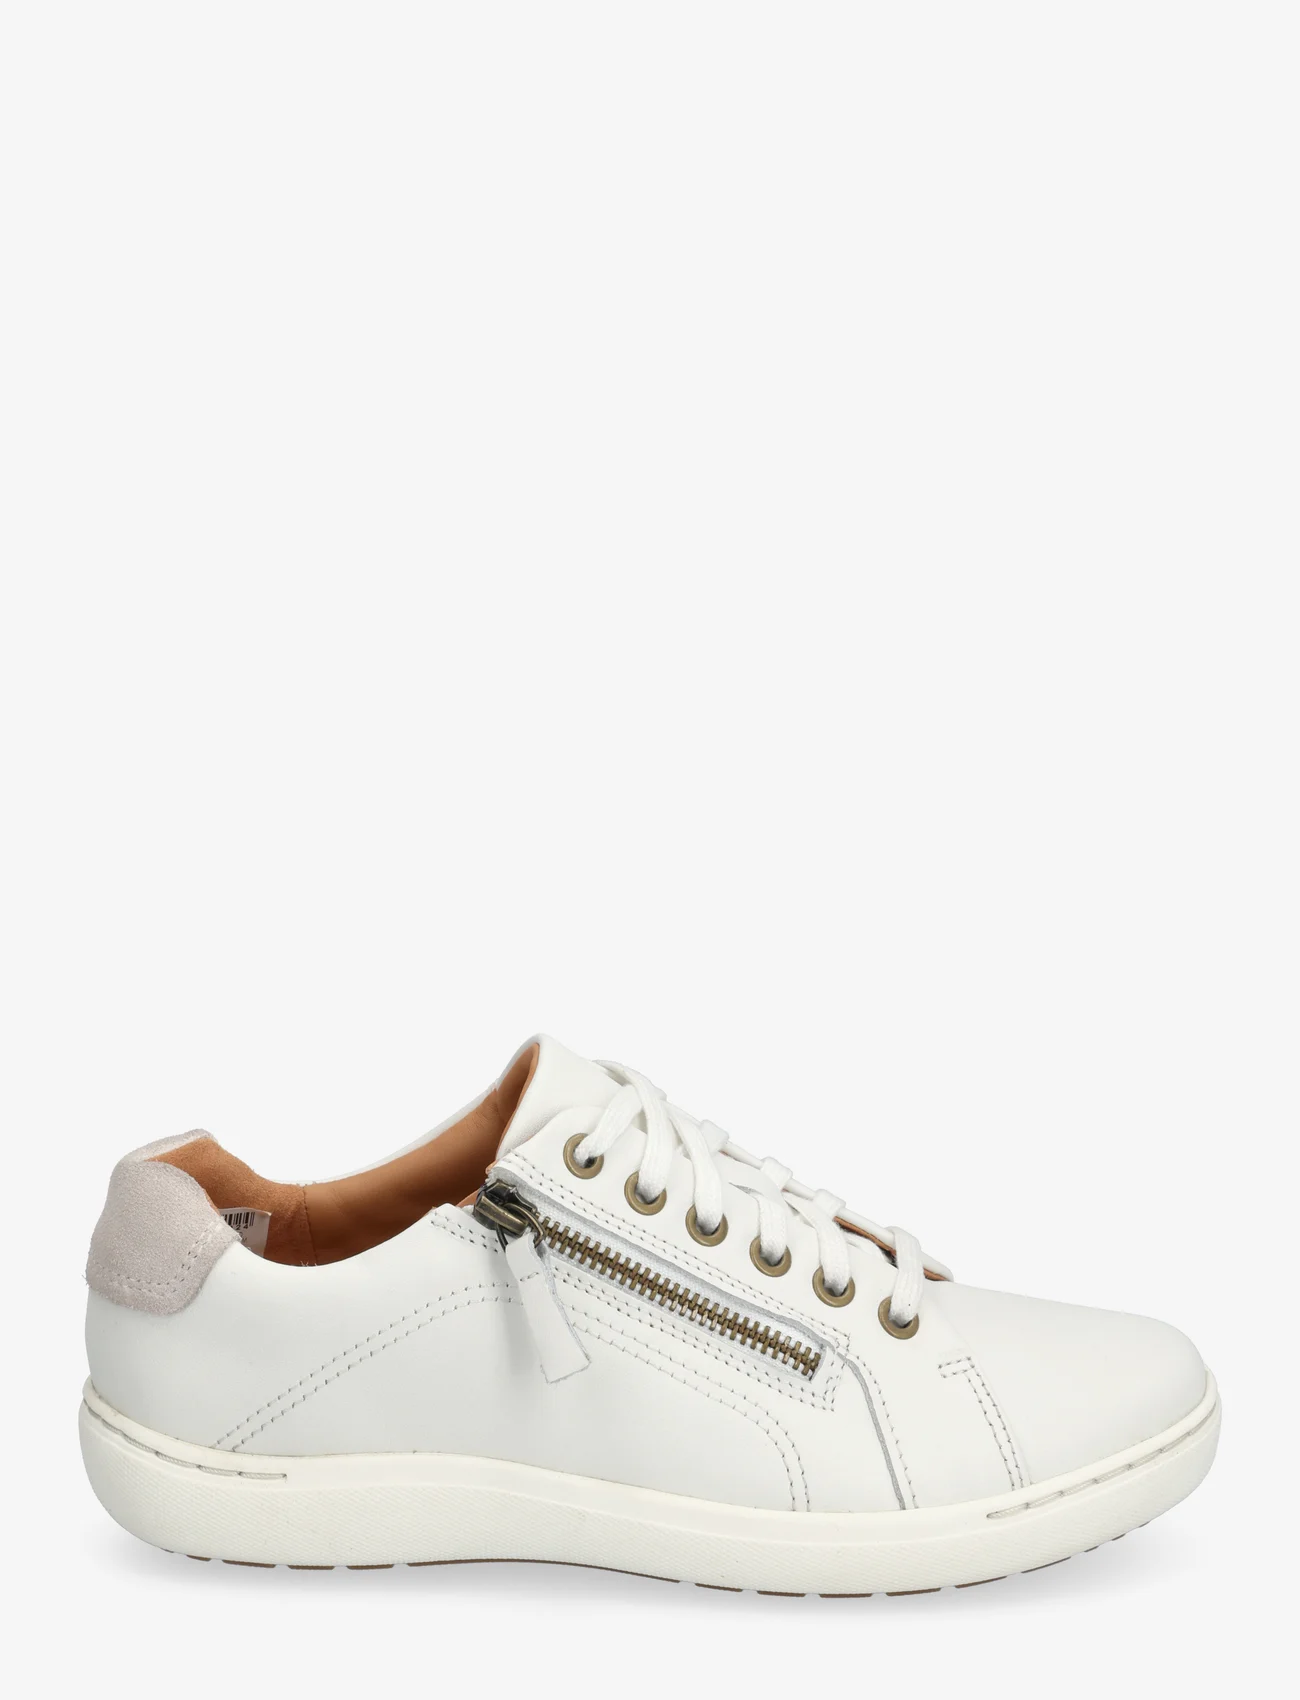 Clarks - Nalle Lace D - lave sneakers - 1255 white leather - 1